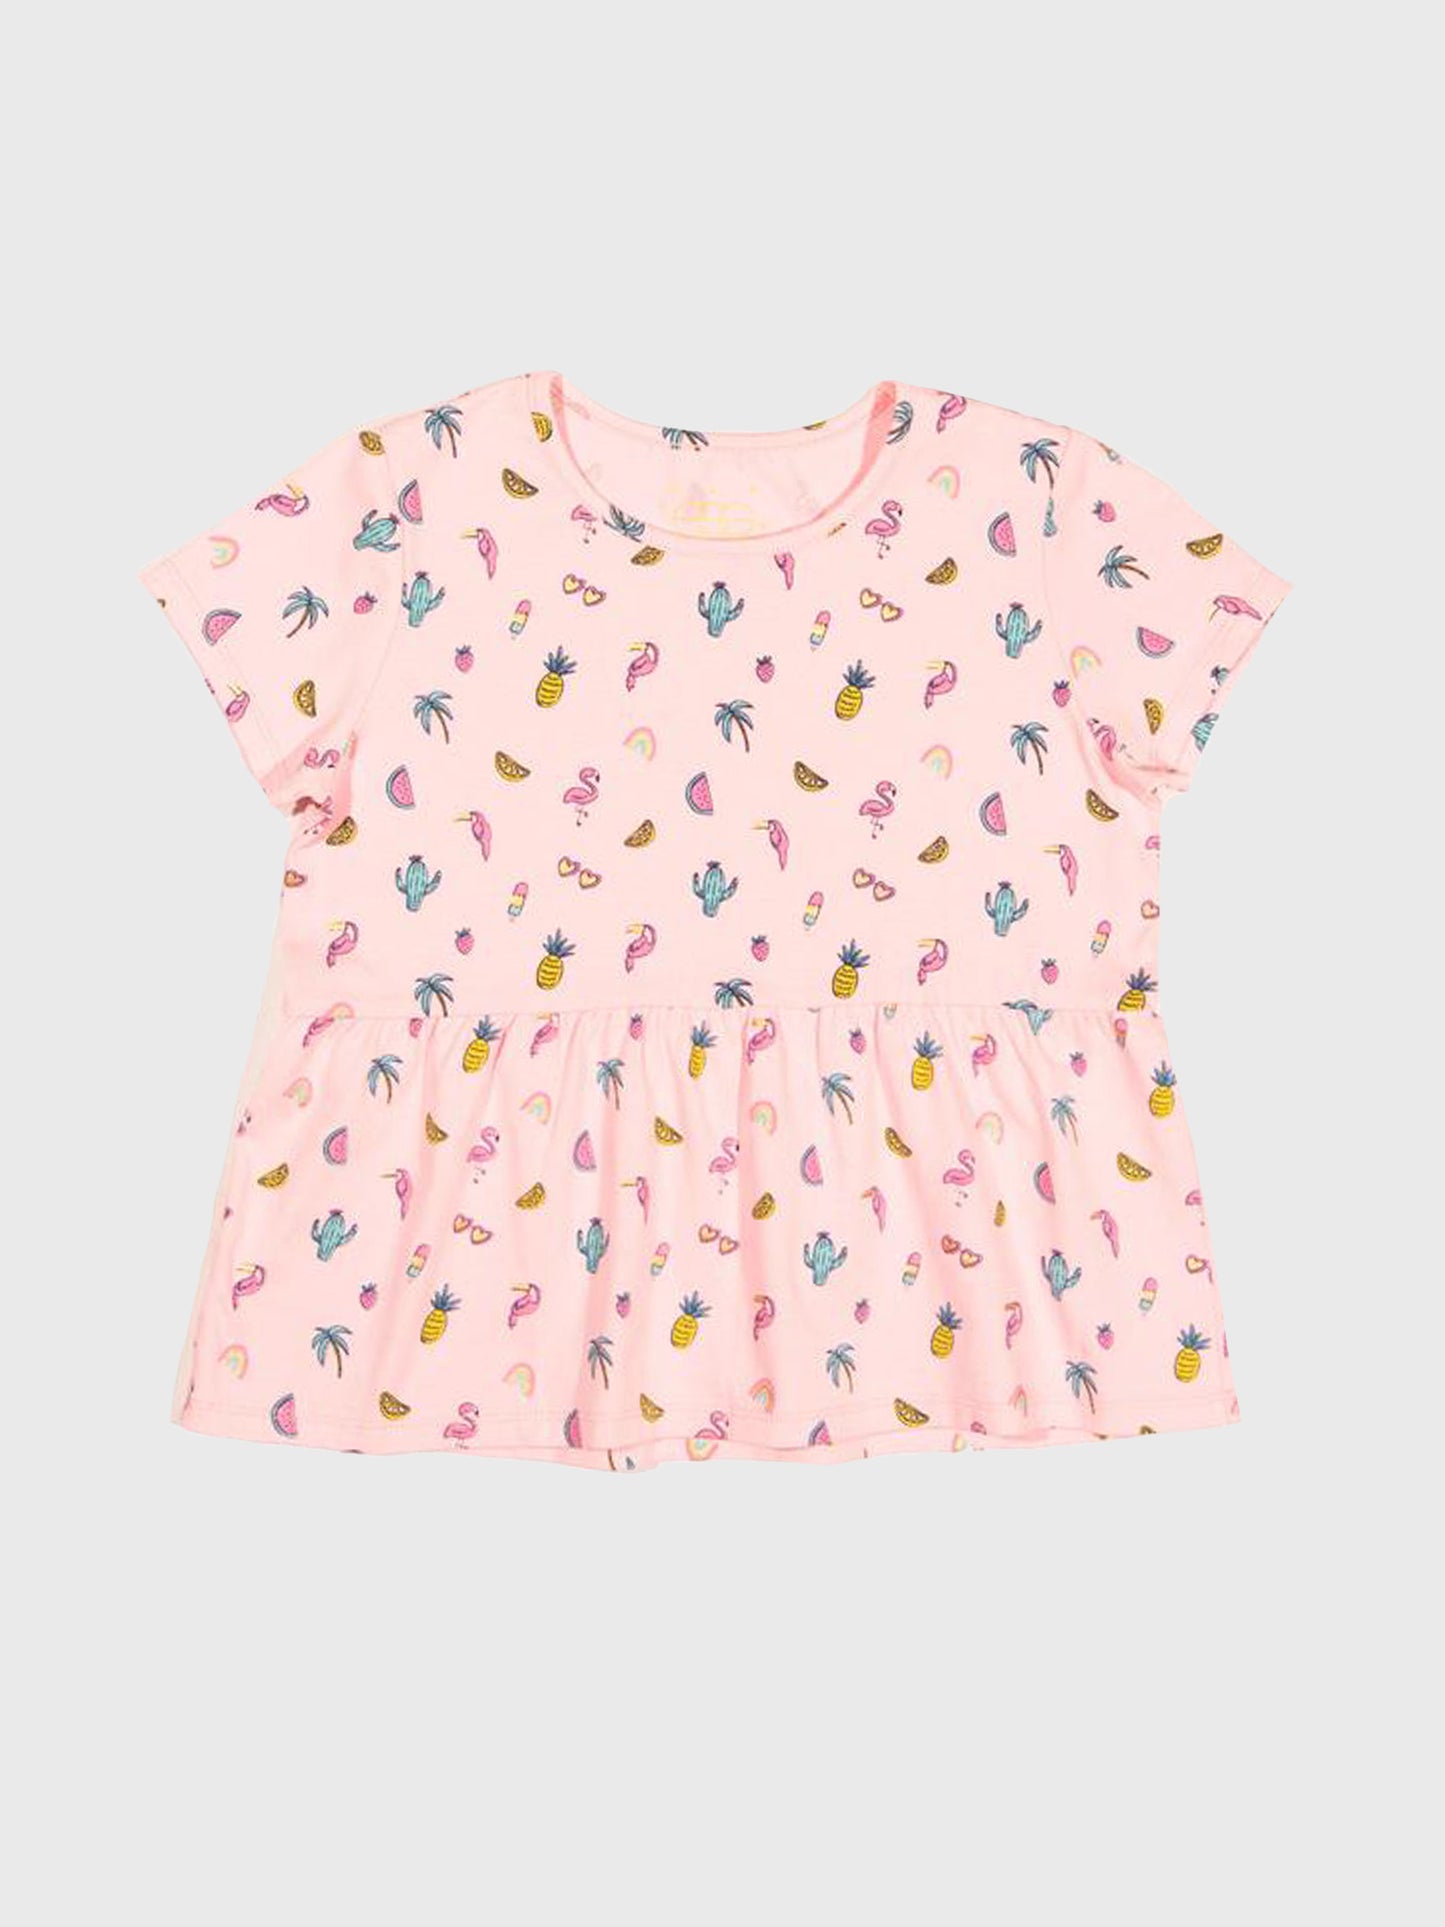 Egg Girls' Palm Spring Party Waverly Tee